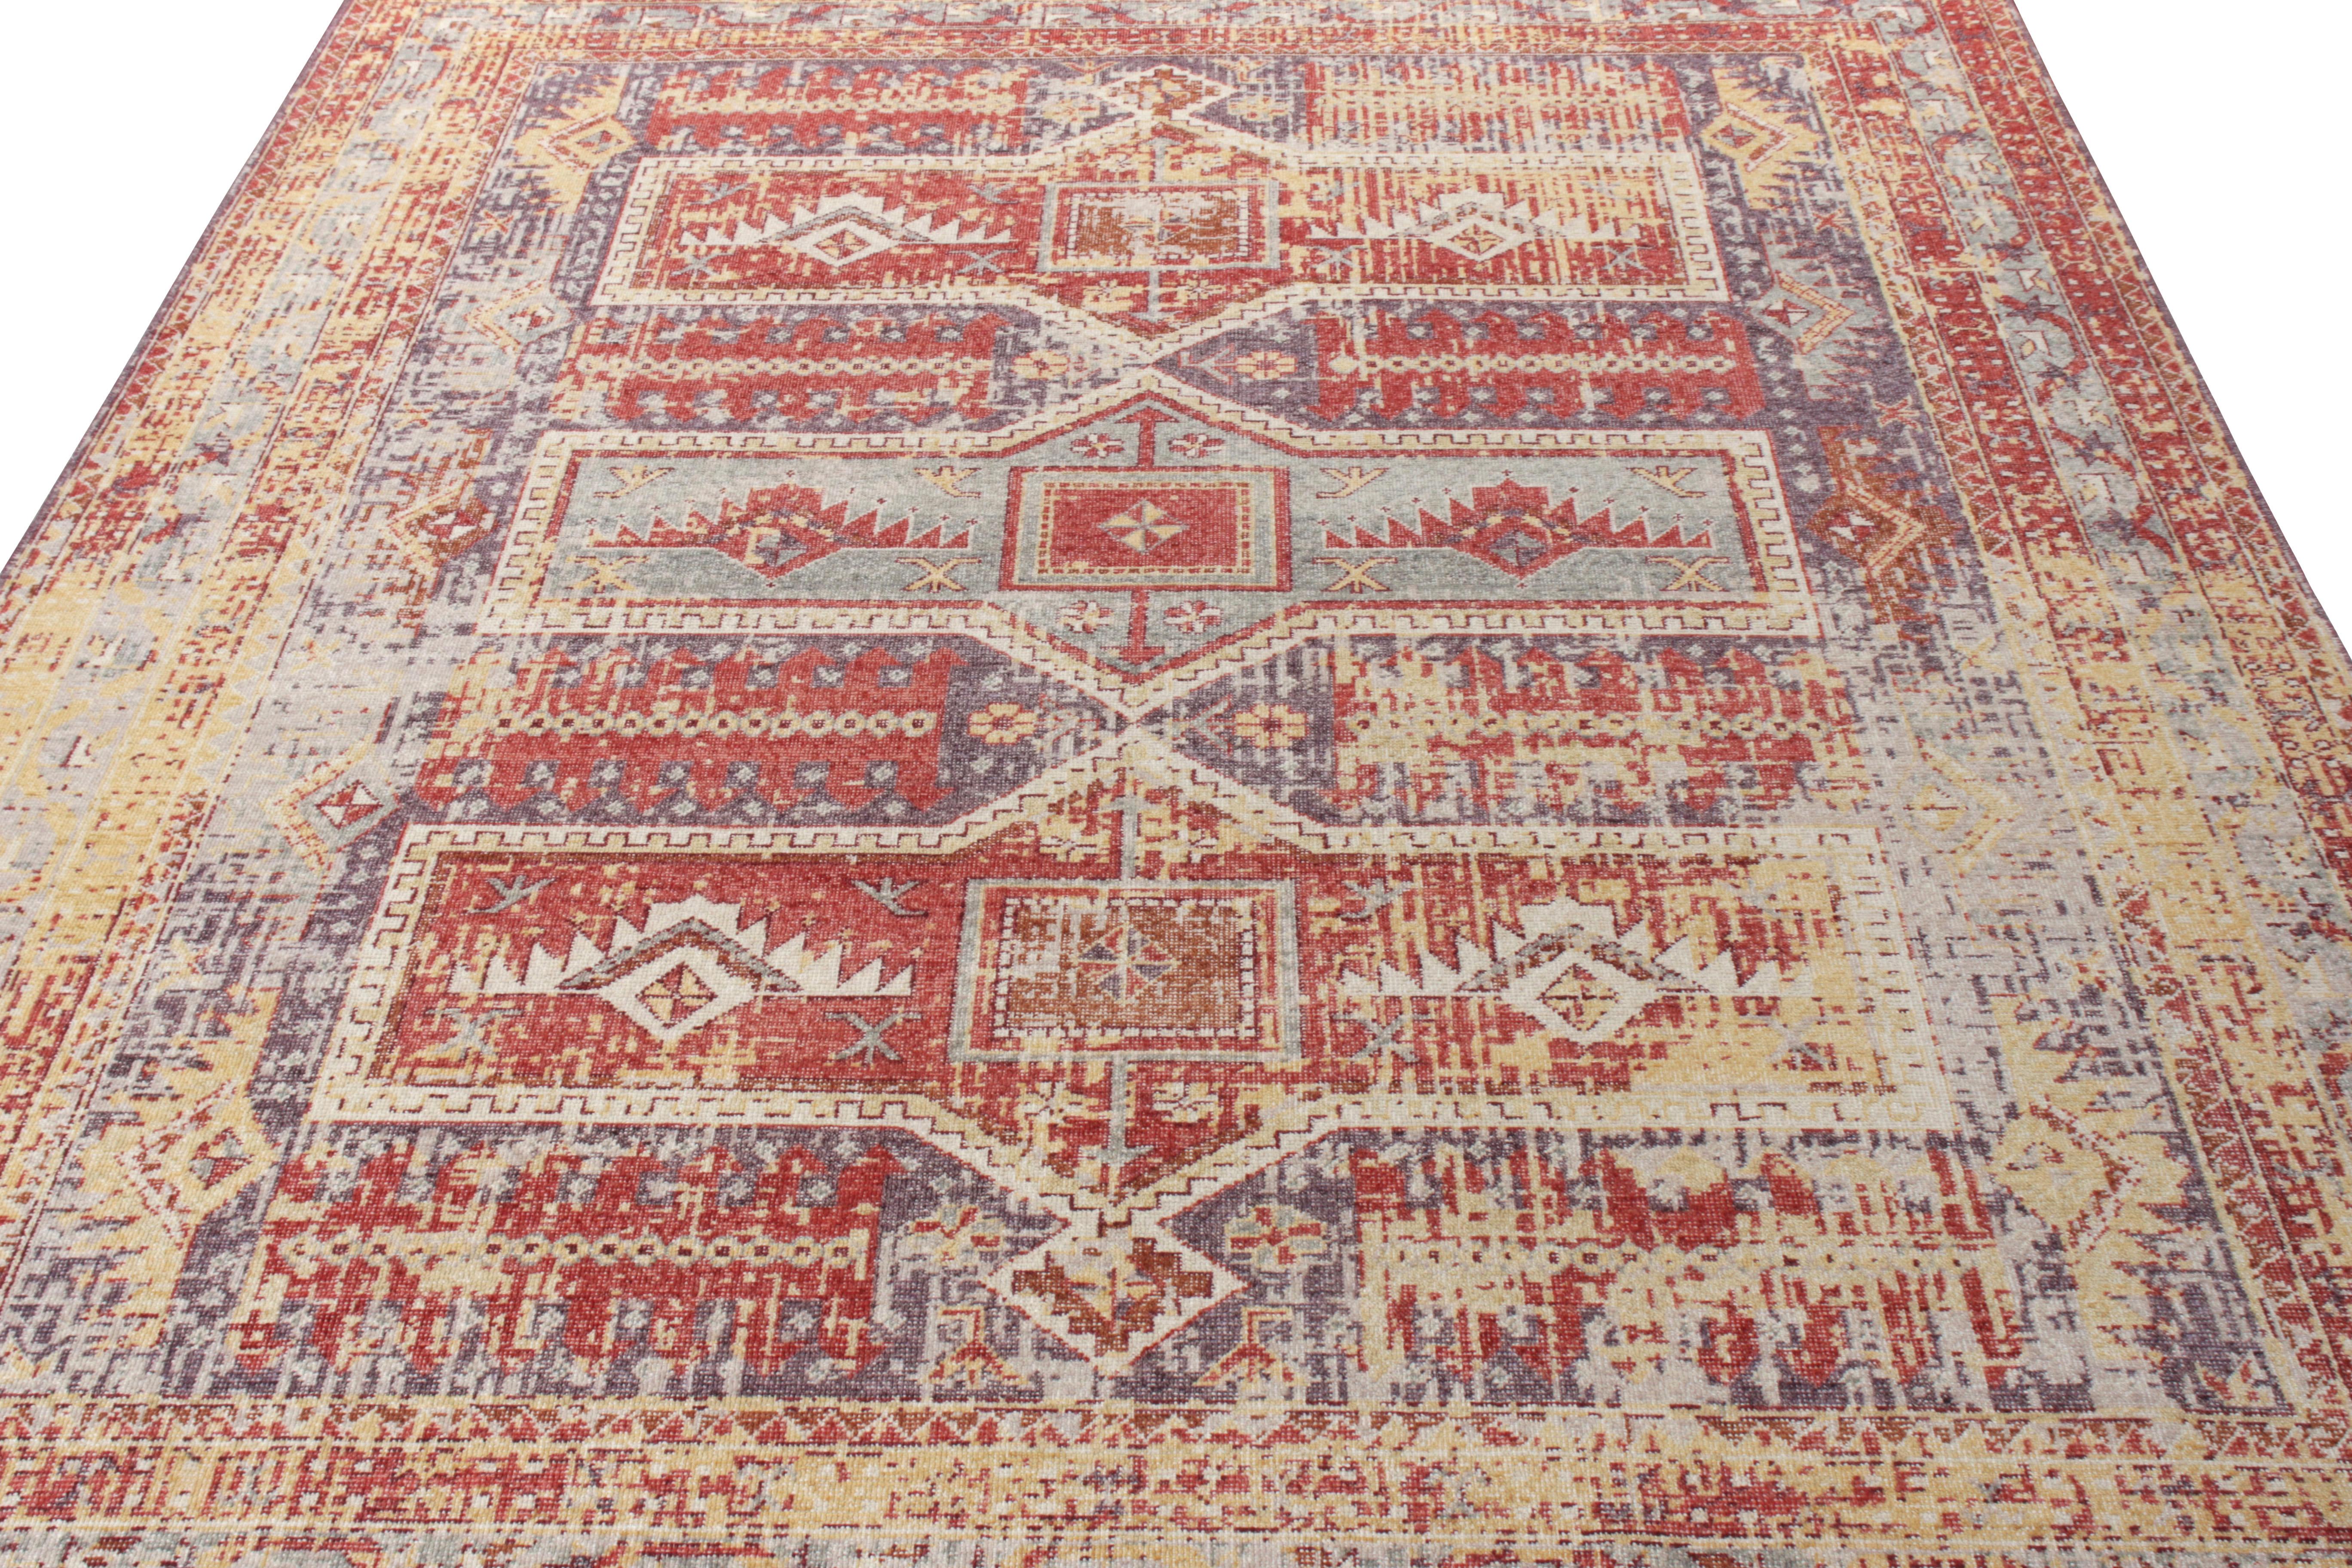 Hand knotted in low-sheared wool exemplified in this 9x12 size, this shabby chic style rug hails from Rug & Kilim’s Homage Collection. Bearing the characteristics traits of this line, the rug witnesses the essence of distressed style spread